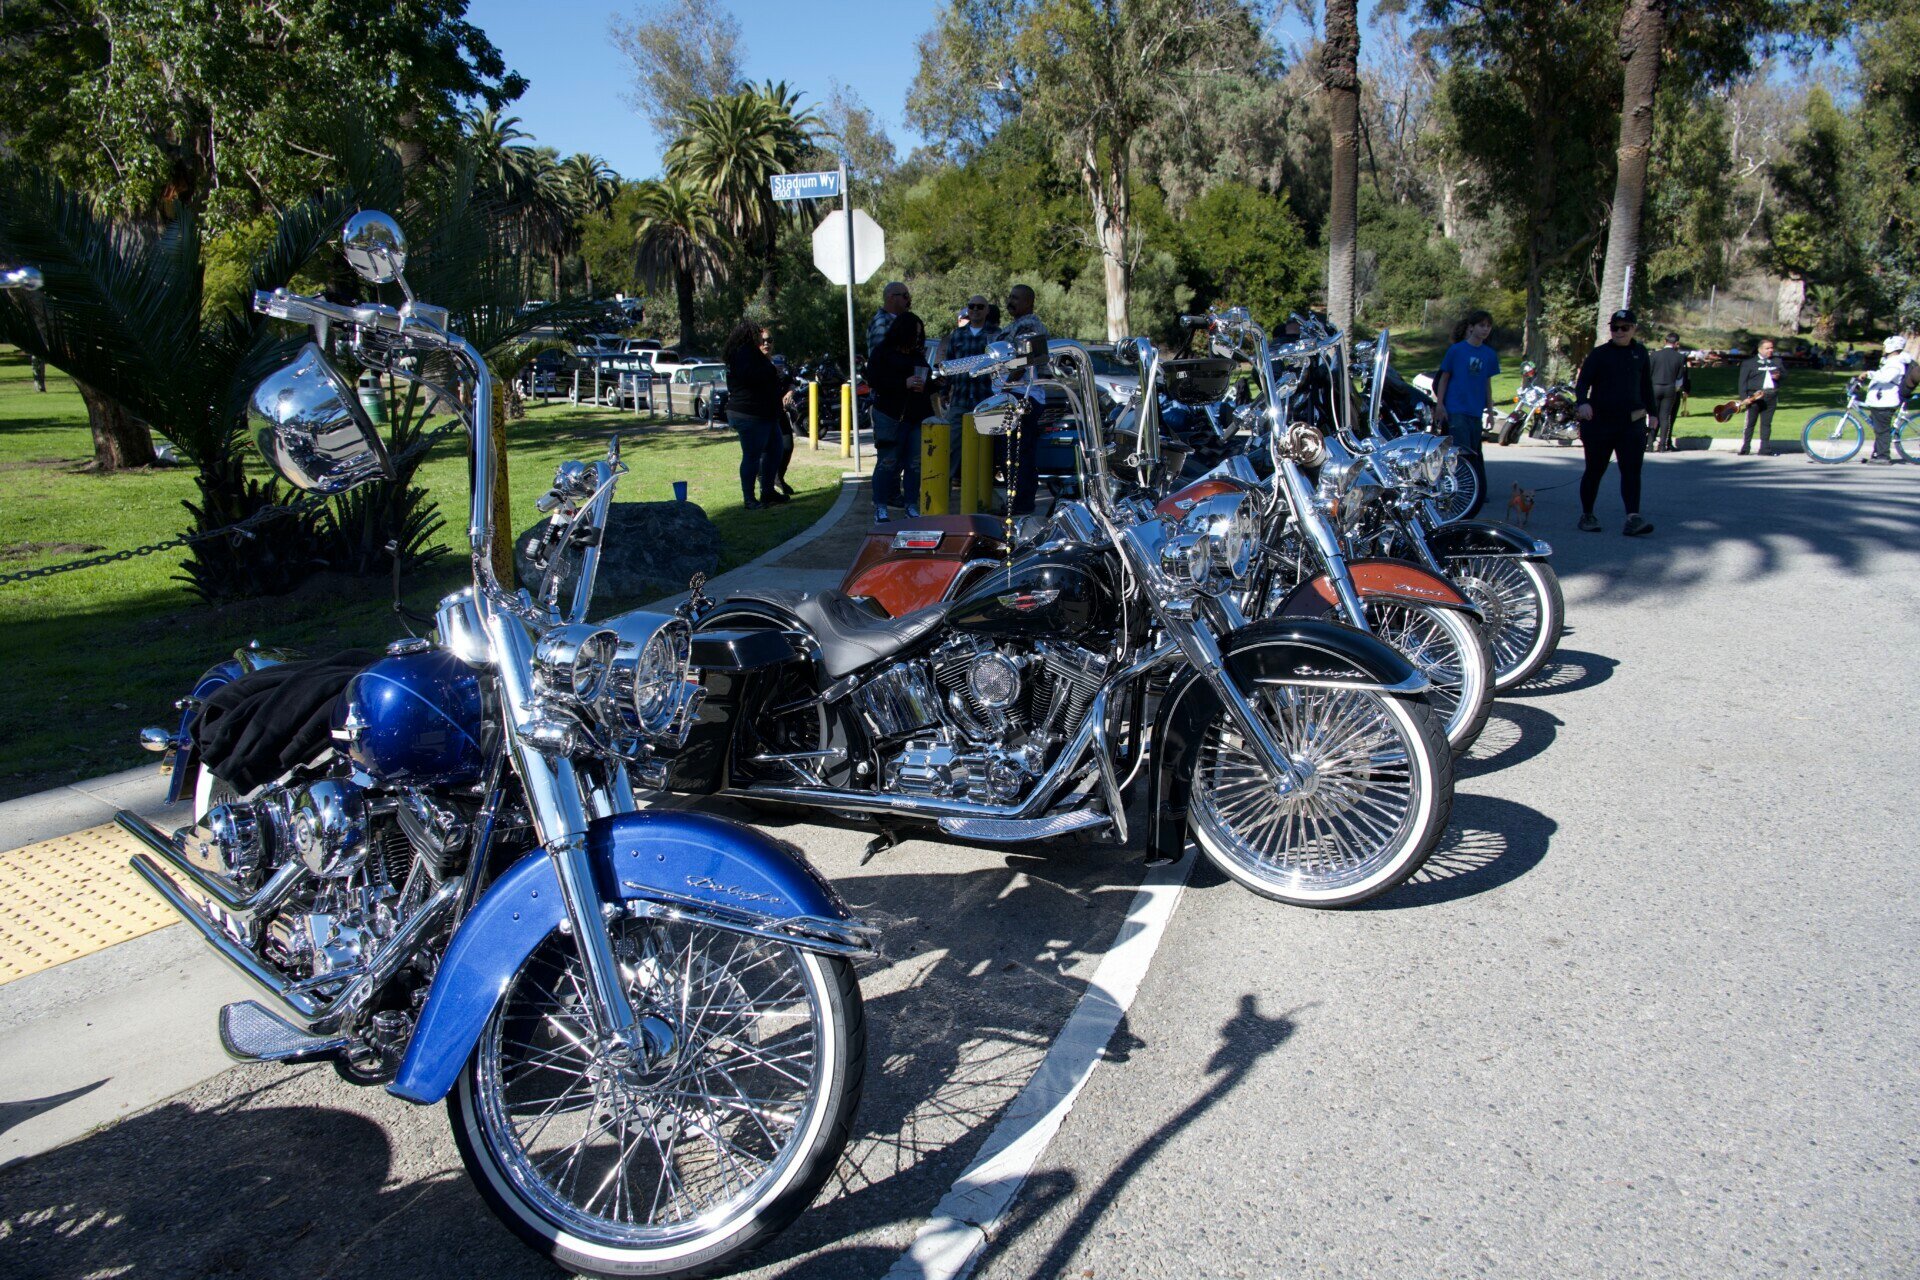 A lineup of classic motorcycles on display at Elysian Park, with chrome details glinting in the sunlight